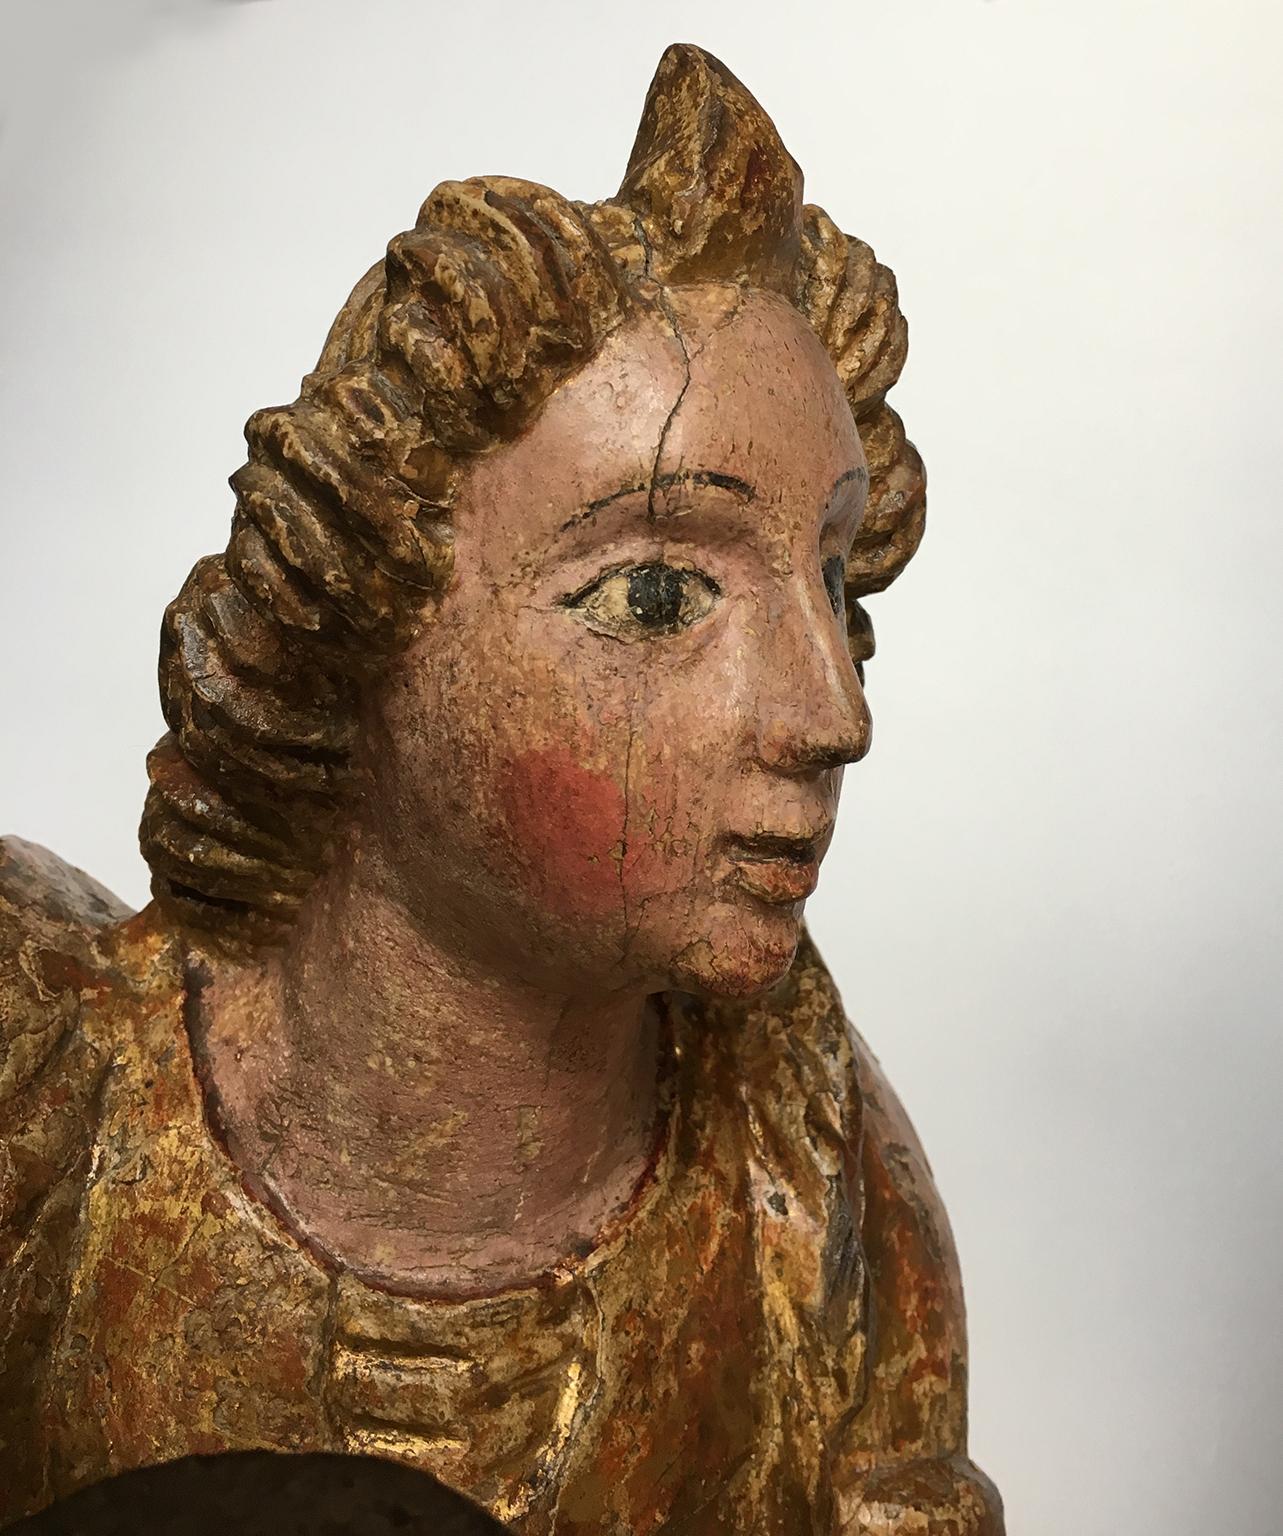 Carved Early Italian Renaissance Wooden Angel Sculptures Gilded Tuscany, circa 1470